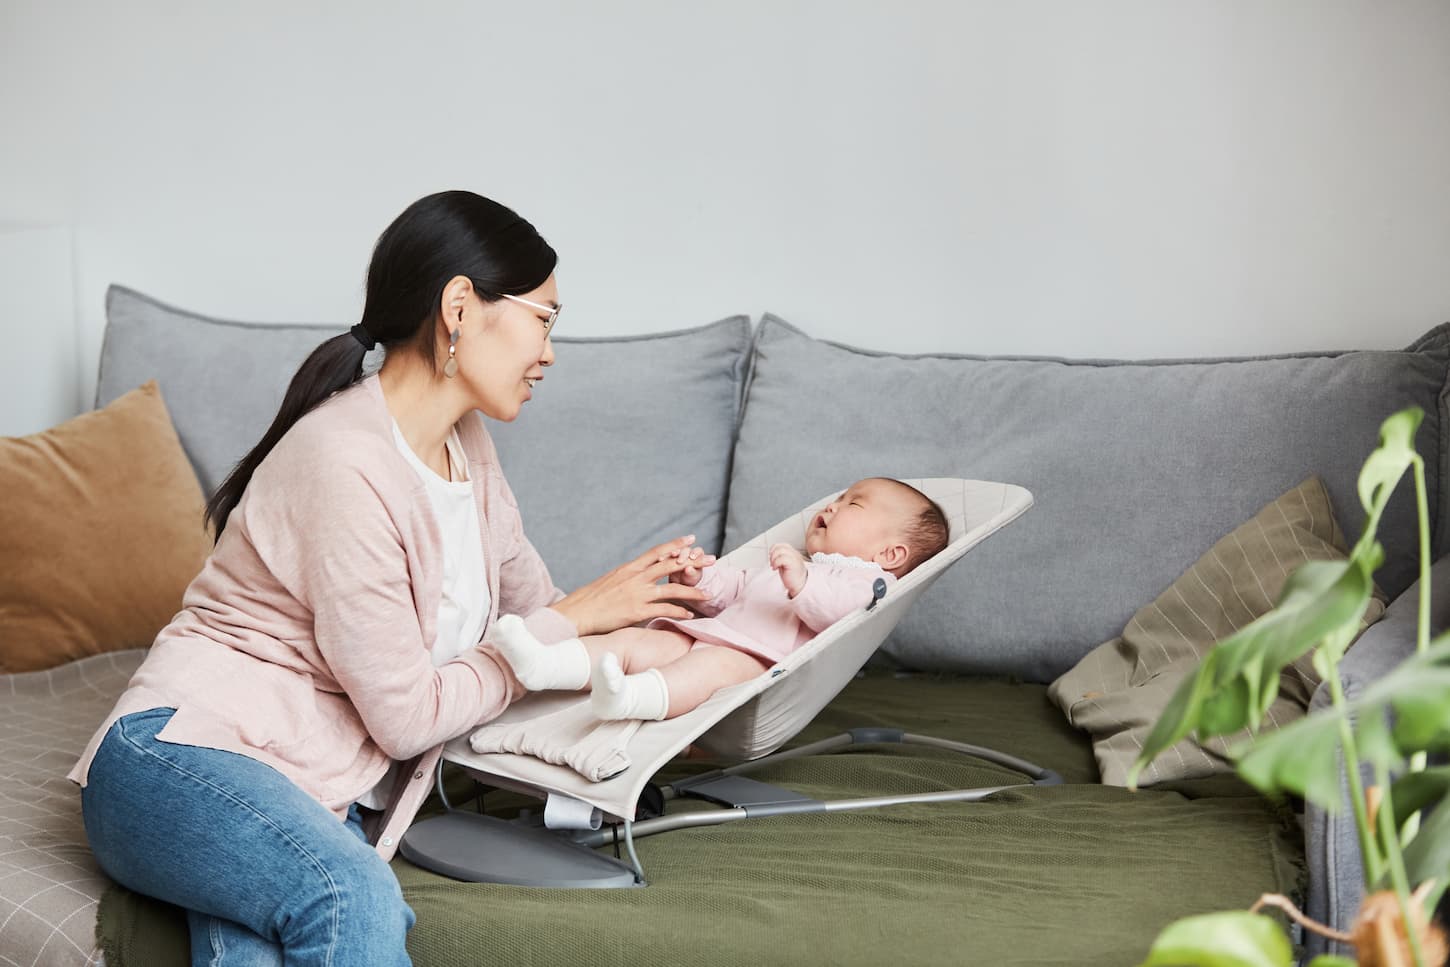 An image of a young mother talking to her baby while she crying in the lounge chair in the living room.